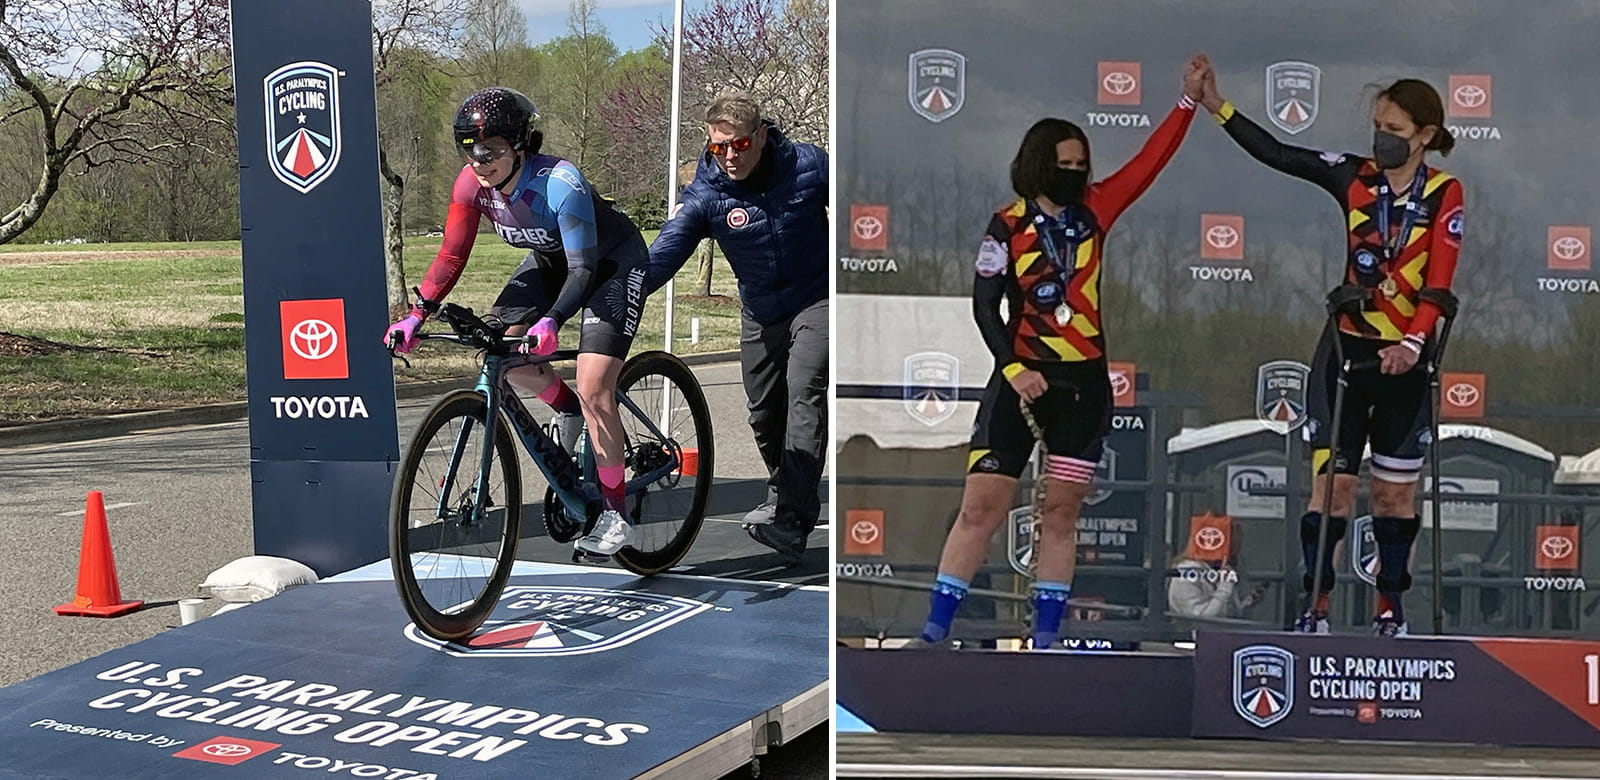 Left: A cyclist at the start line. Right: Two athletes high-five on the podium.